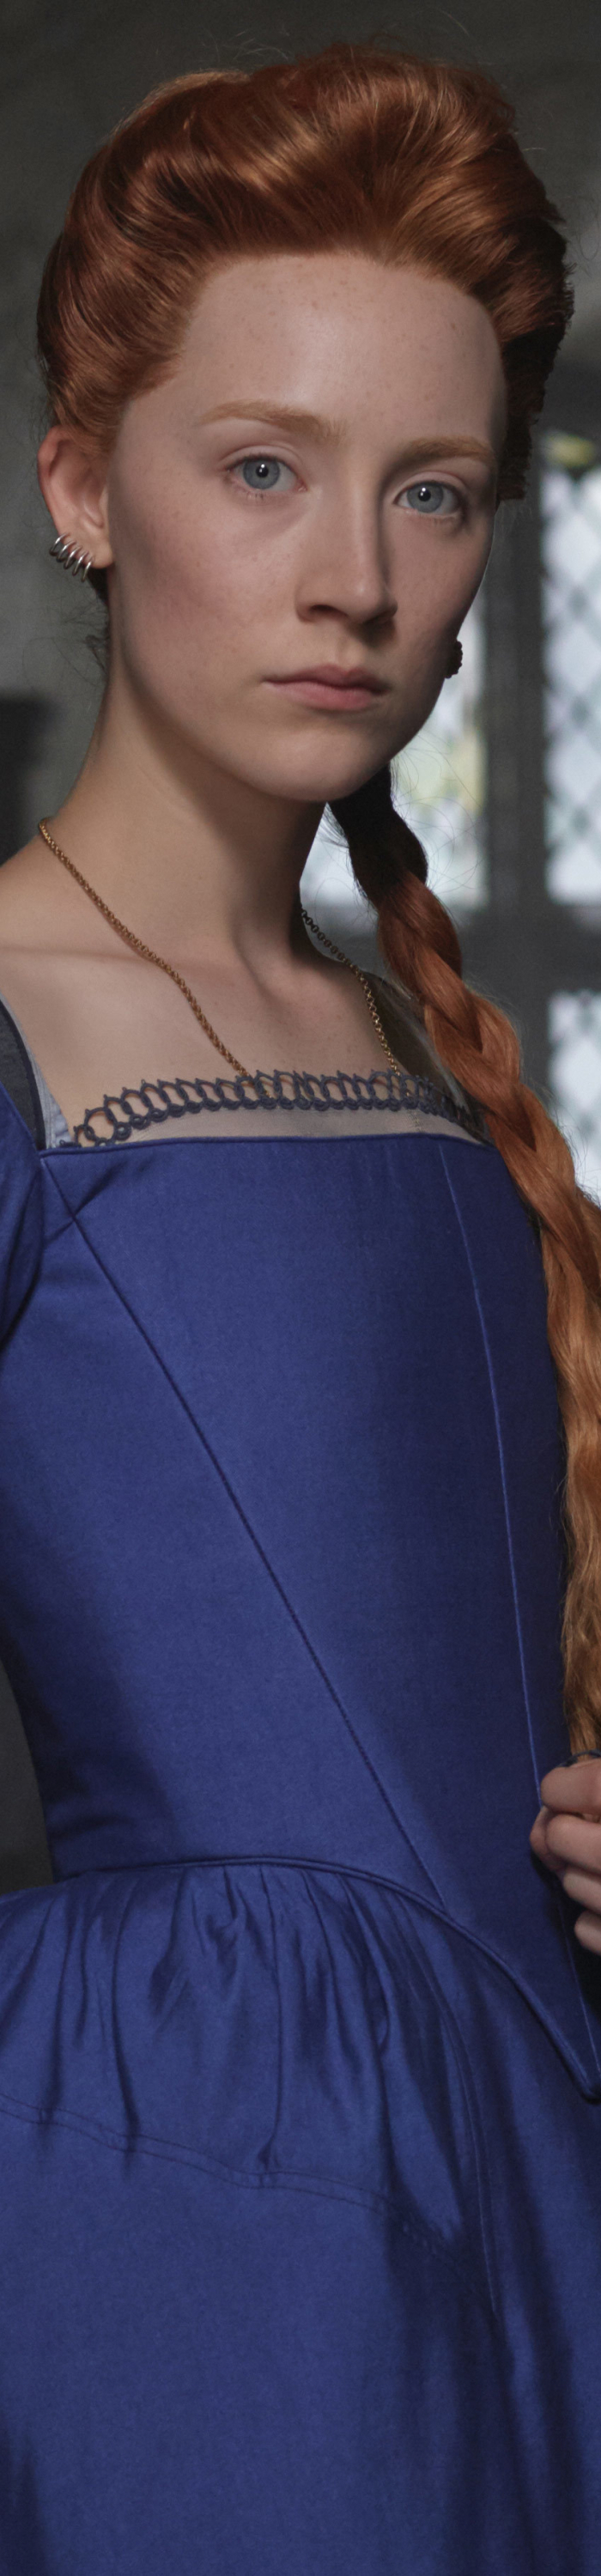 700x3000 Saoirse Ronan As Mary In Mary Queen Of Scots 700x3000 Resolution Wallpaper Hd Movies